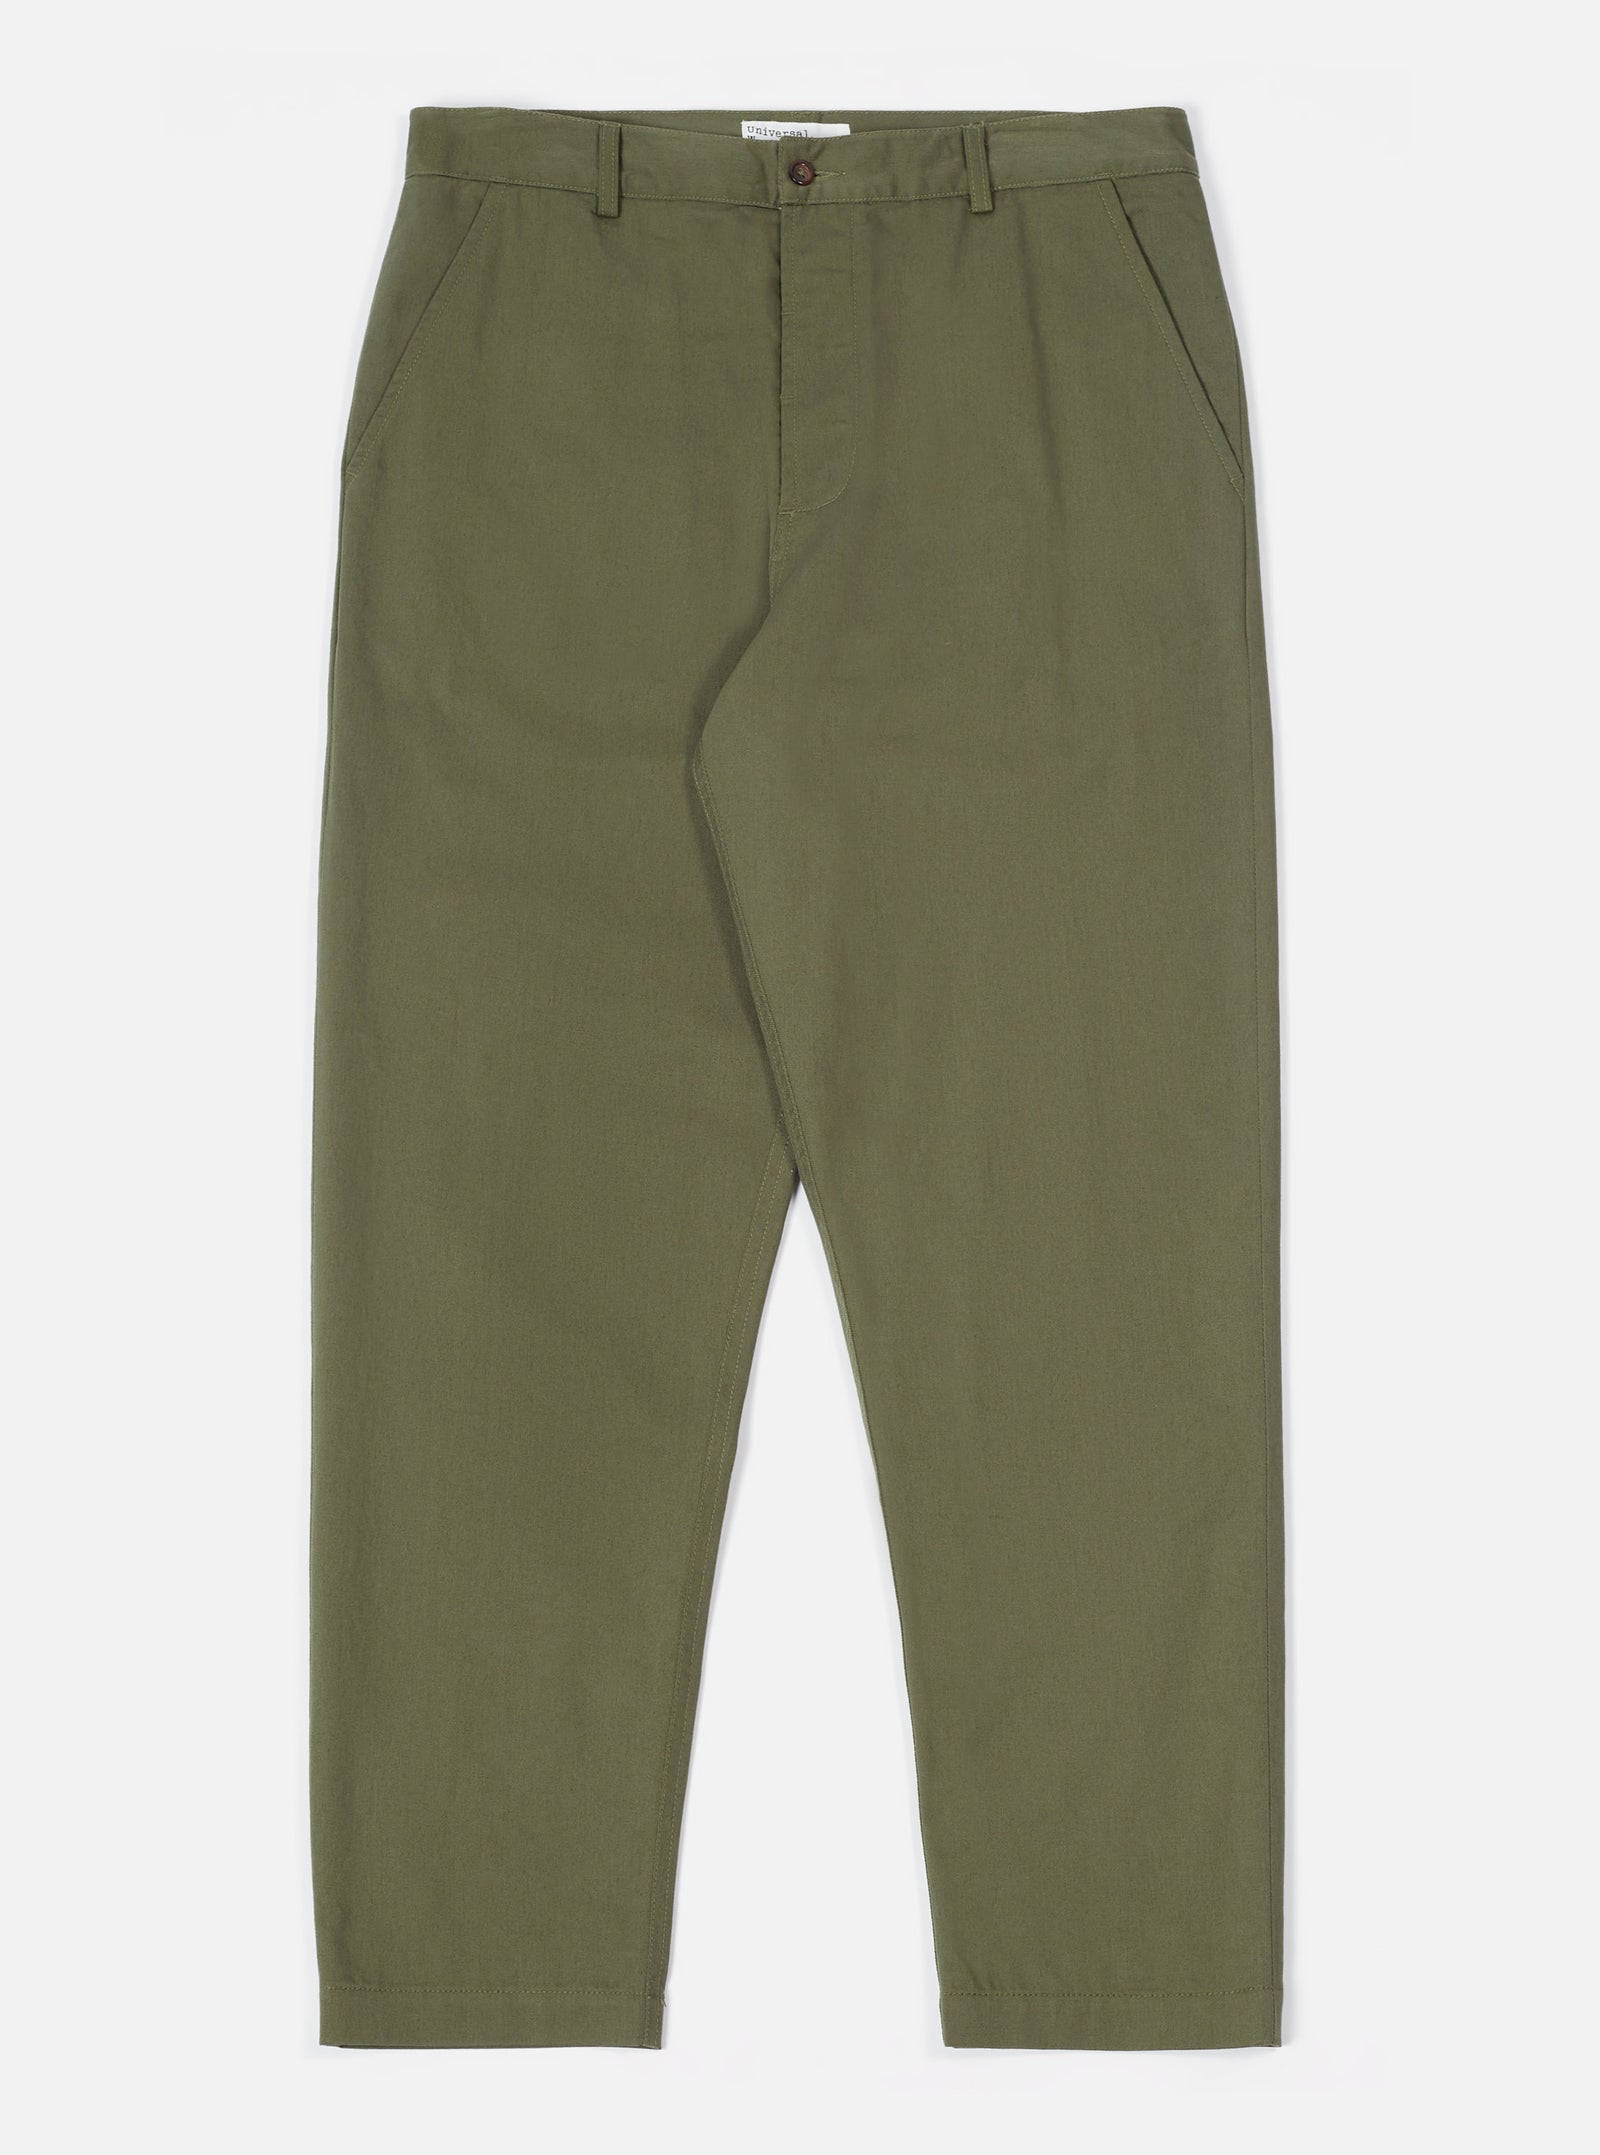 Buy Men's Feather Light Green Pant Online | SNITCH